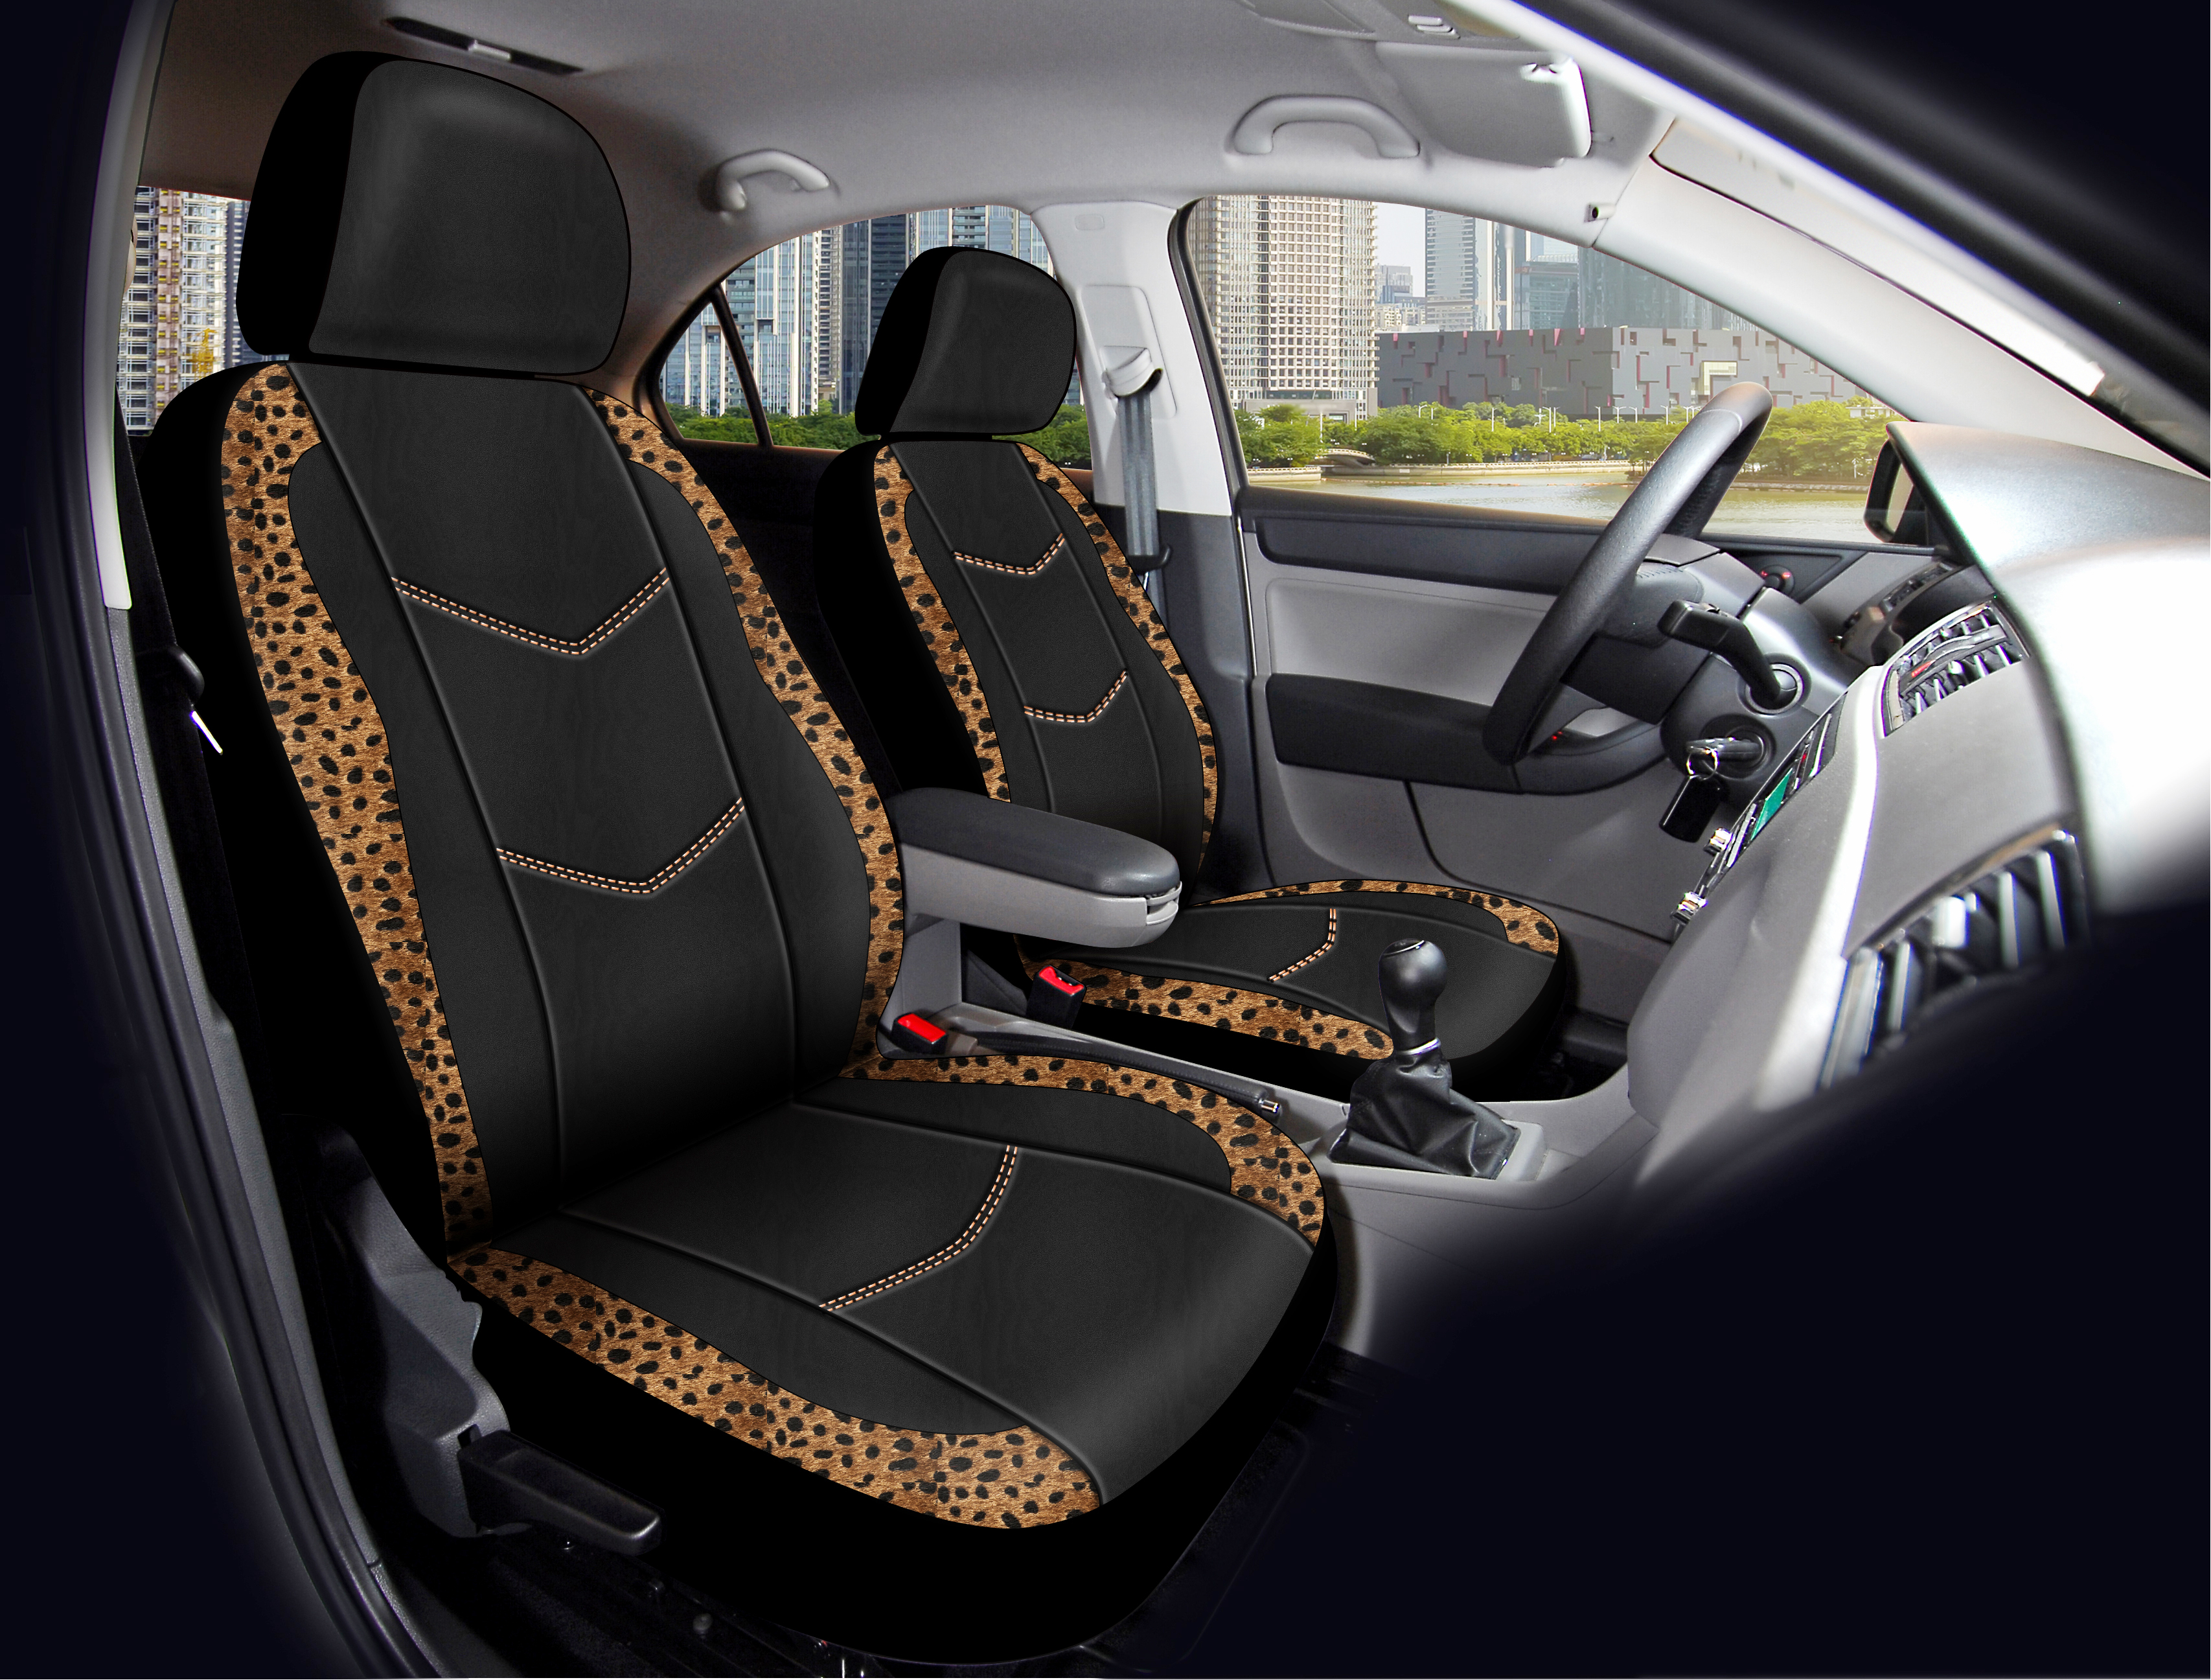 Auto Drive Brown Leopard Faux Leather Car Seat Covers, Set of 2, YT014 - image 1 of 7